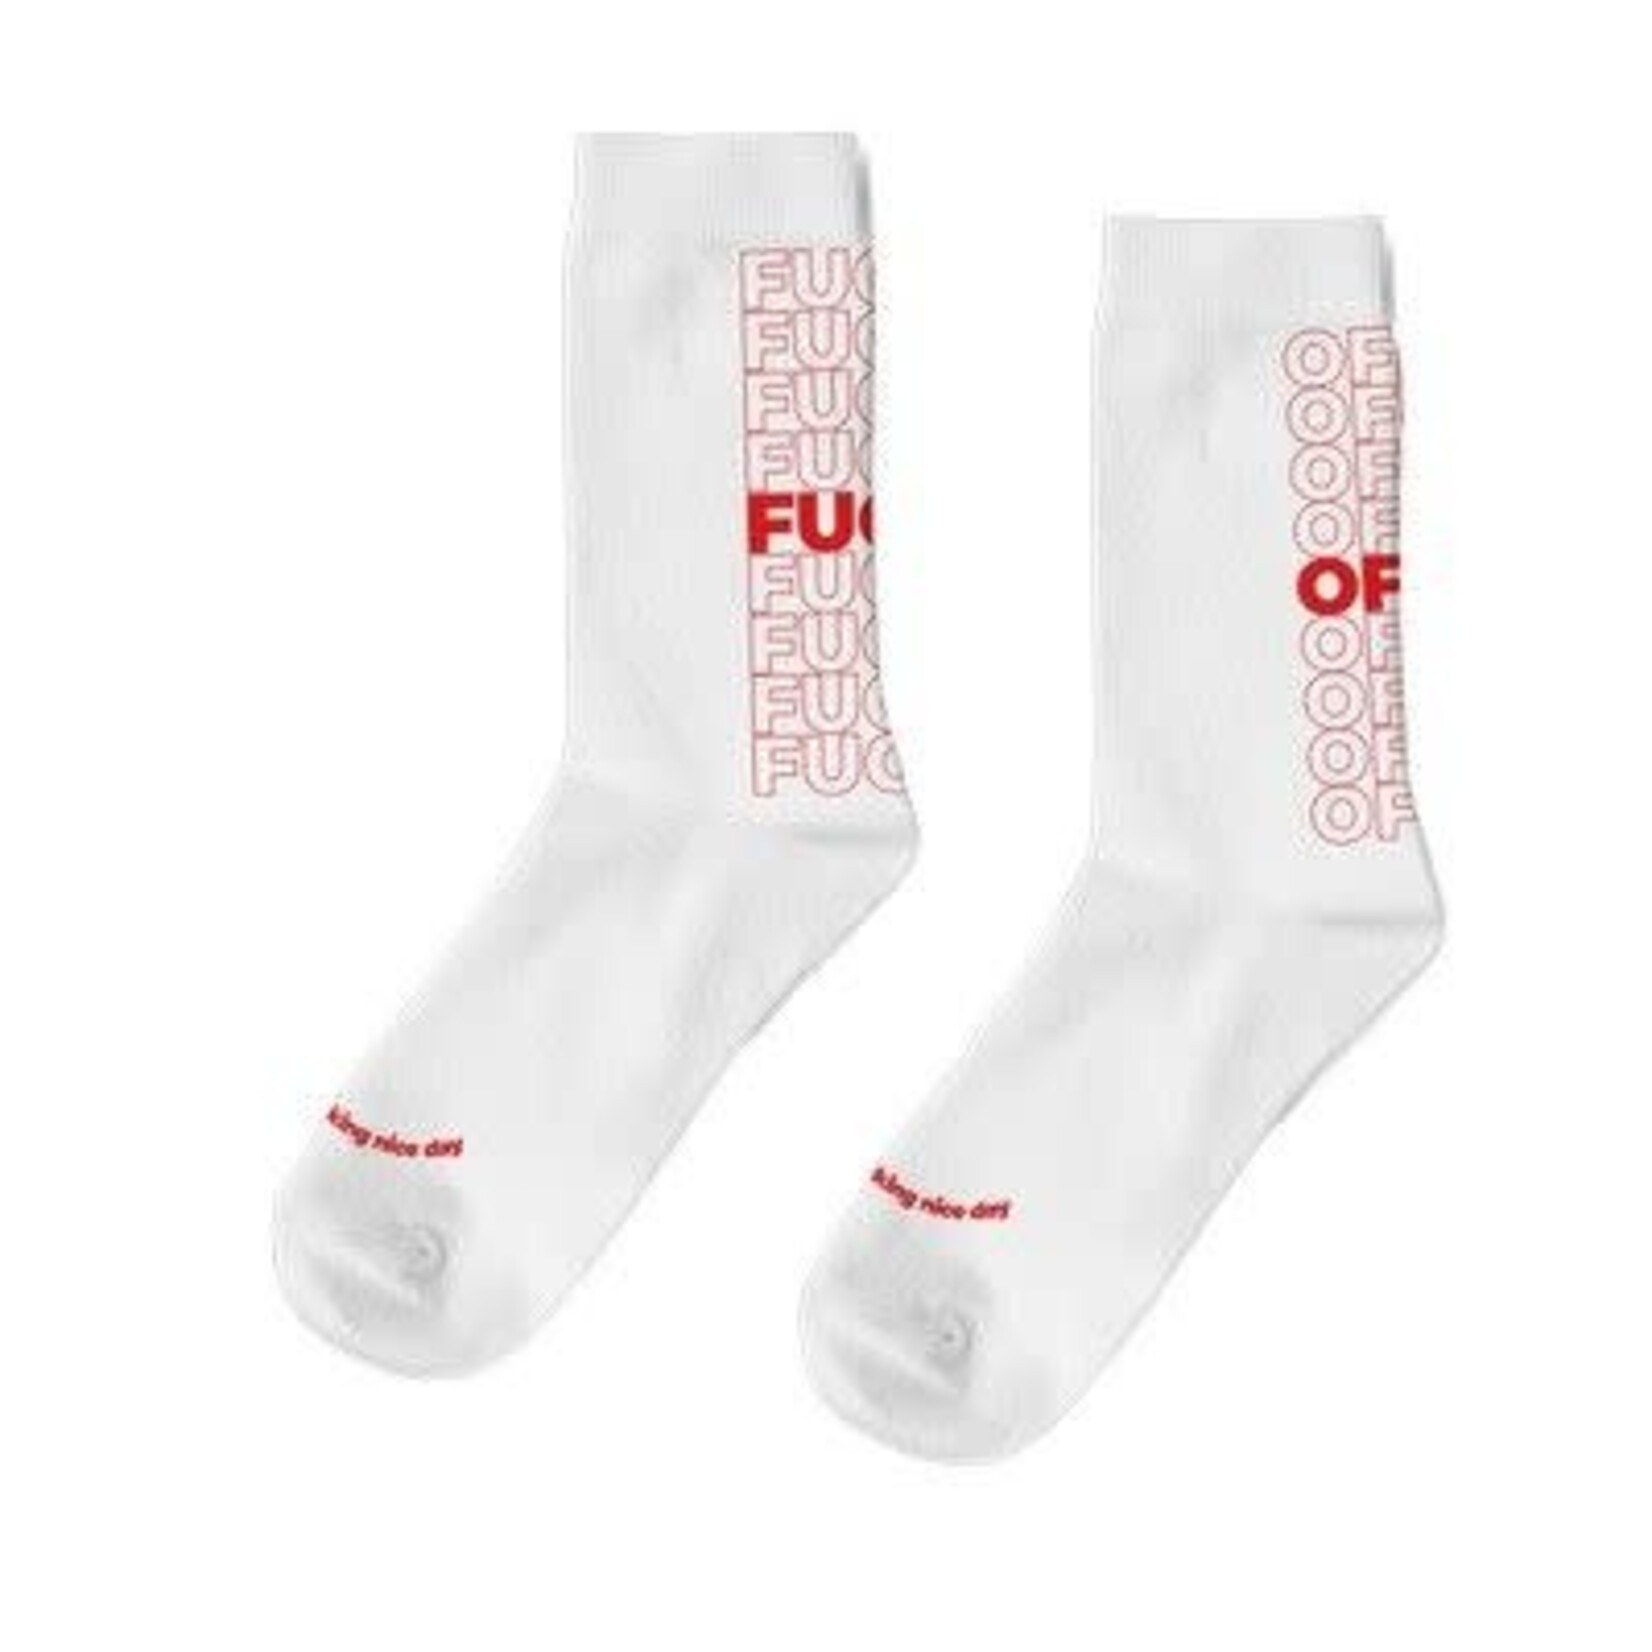 Sock a pair 'Fuck Off' - Red Outline